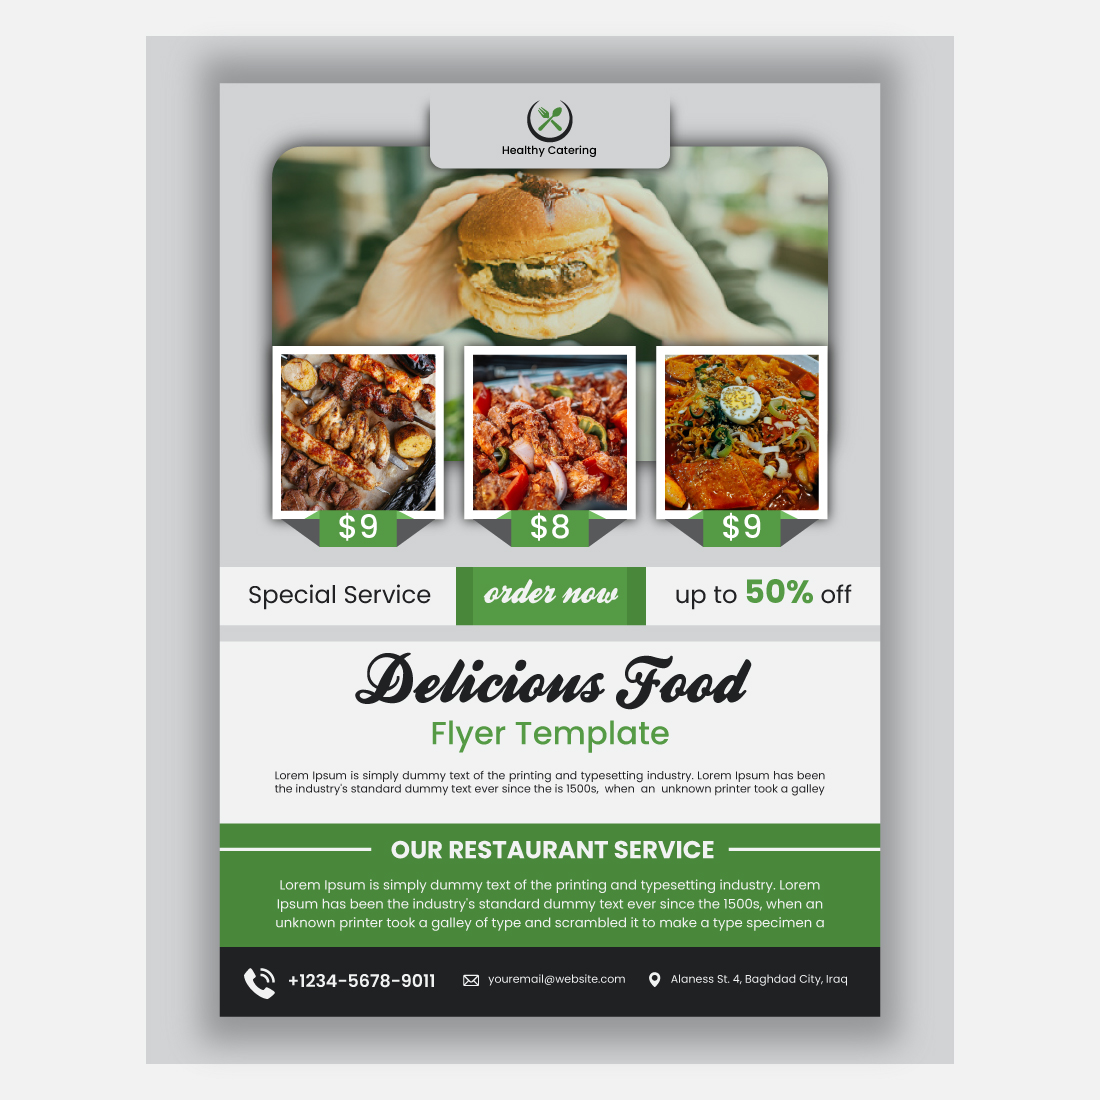 Delicious Food Flyer template cover image.